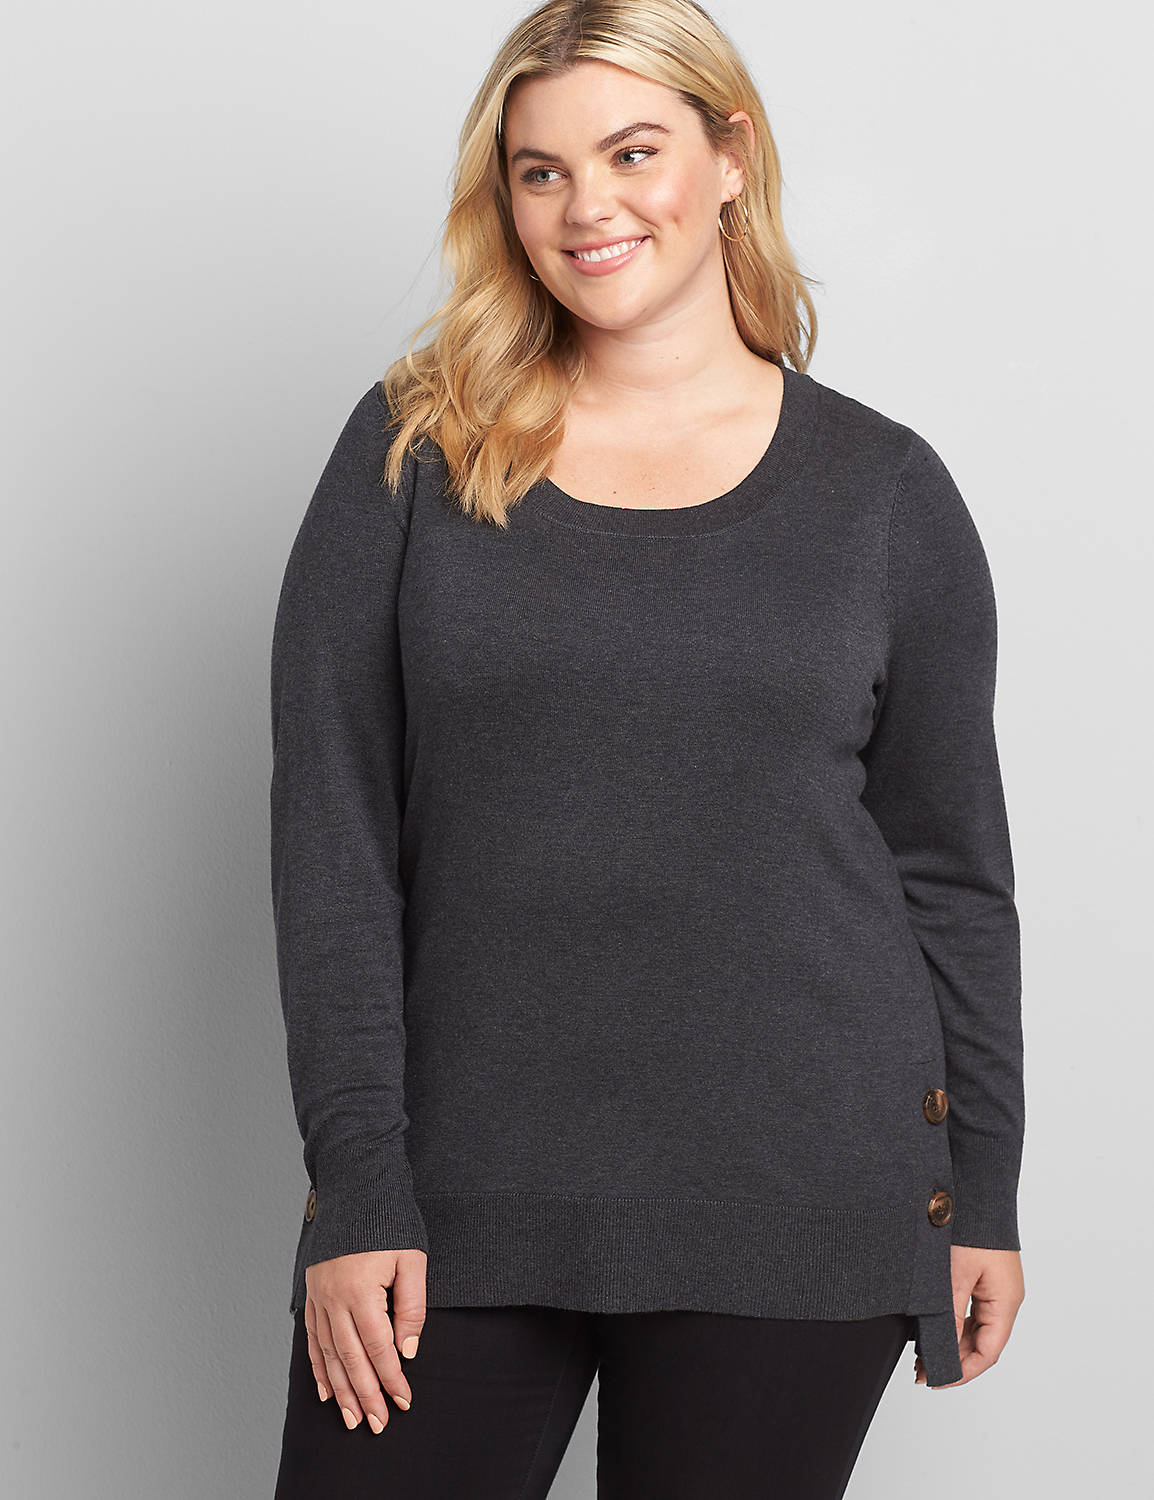 OUTLET LONG SLEEVE SCOOP NECK HI LO BUTTON SIDE TUNIC SWEATER 1113589:Charcoal Heather Huafu #H385:10/12 Product Image 1